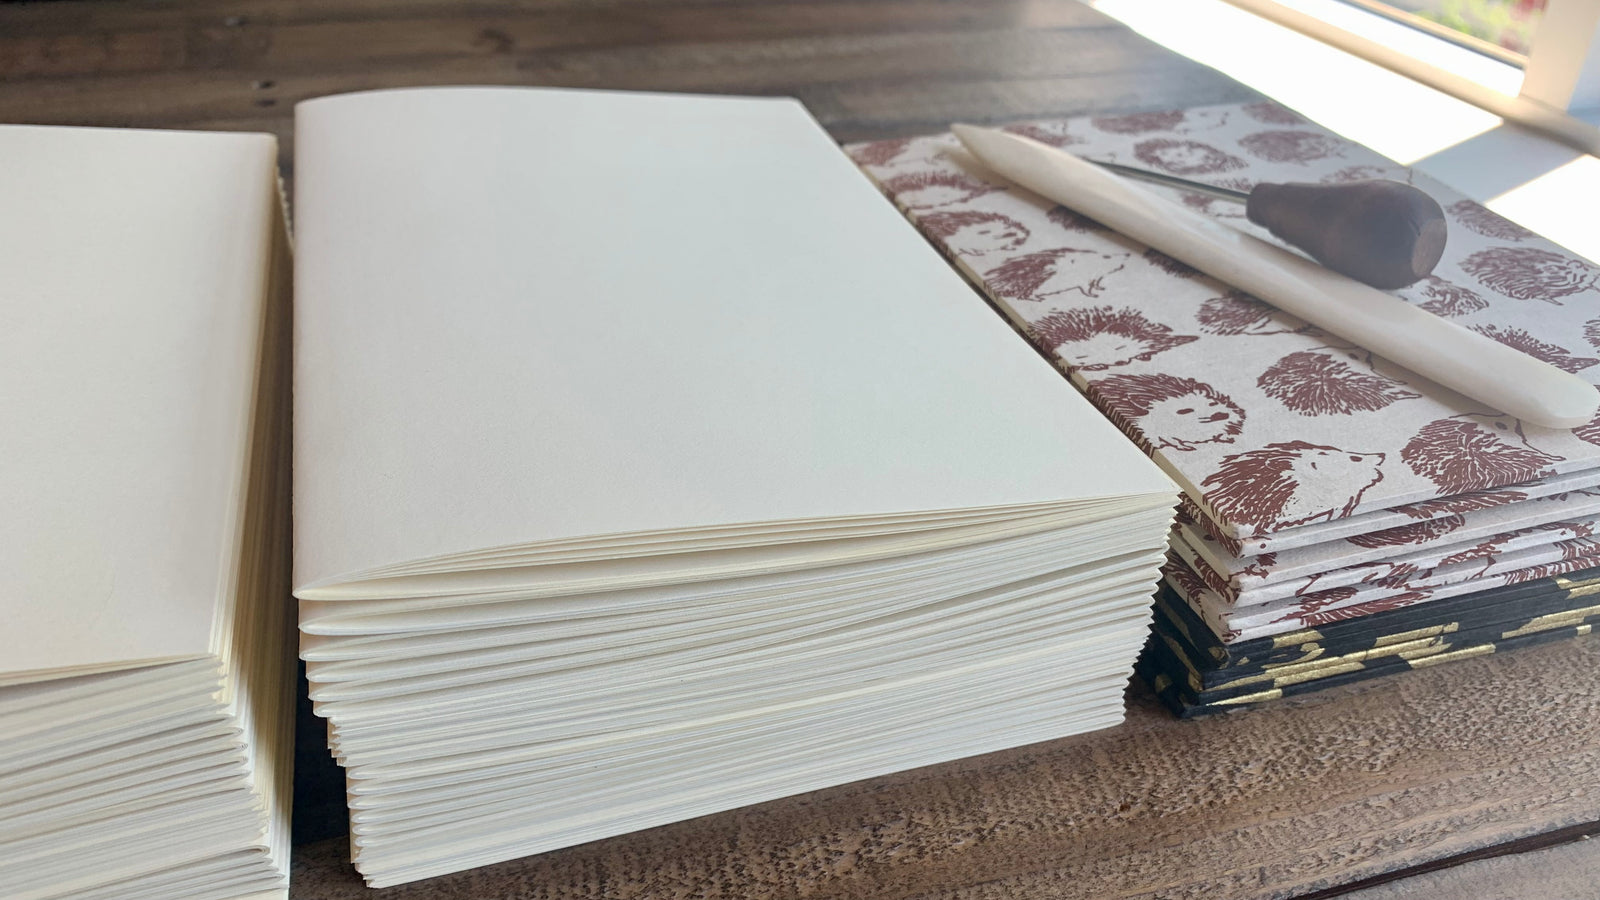 Bookbinding at Home, Part 1: How to Stitch a Single Folio Sketchbook